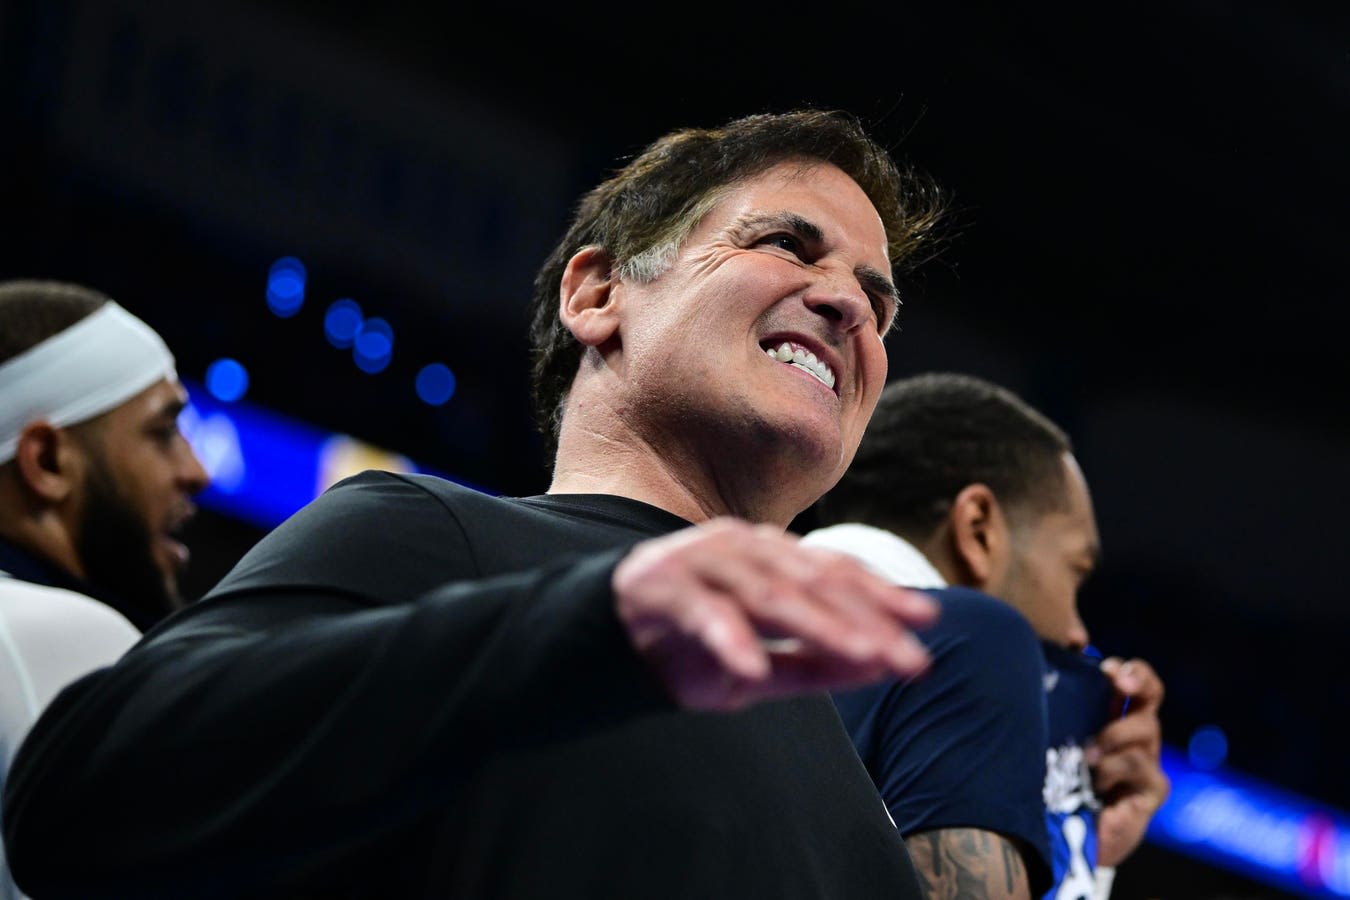 Dallas Mavericks Face Off In NBA Conference Finals—Months After Mark Cuban Ditched His Majority Stake